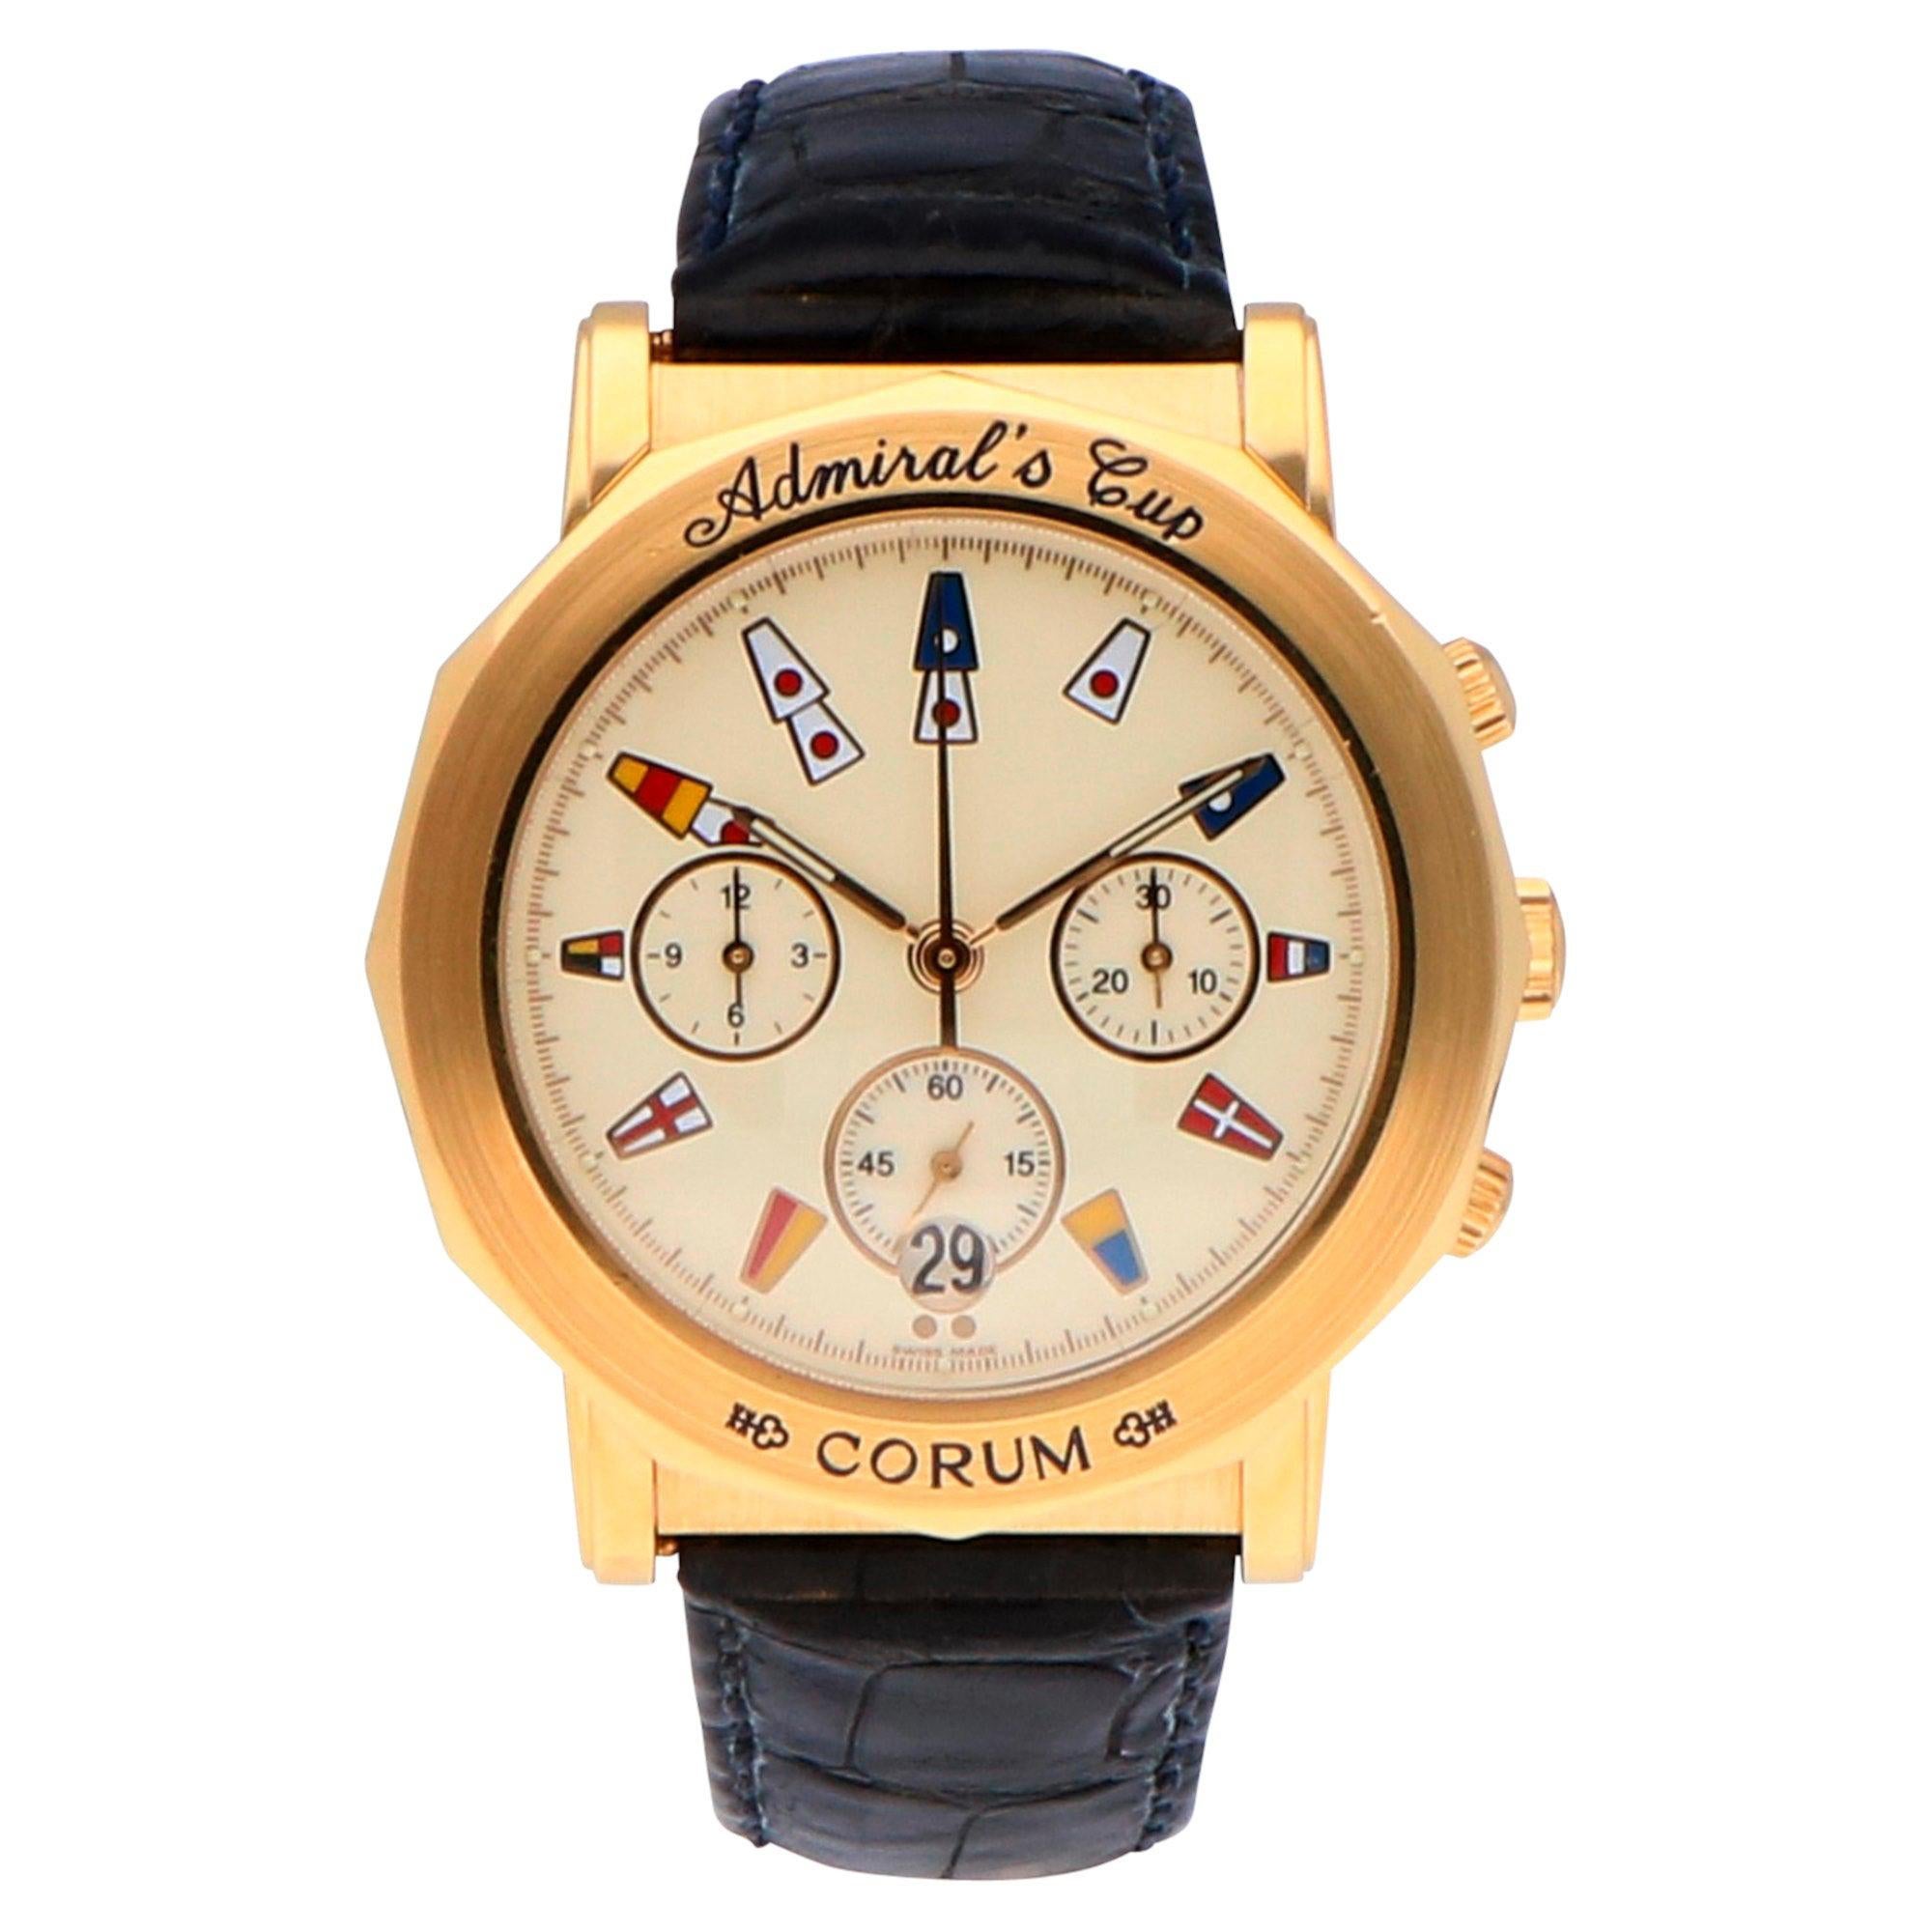 Pre-Owned Corum Admiral's Cup 18 Karat Yellow Gold 296.830.56 Watch